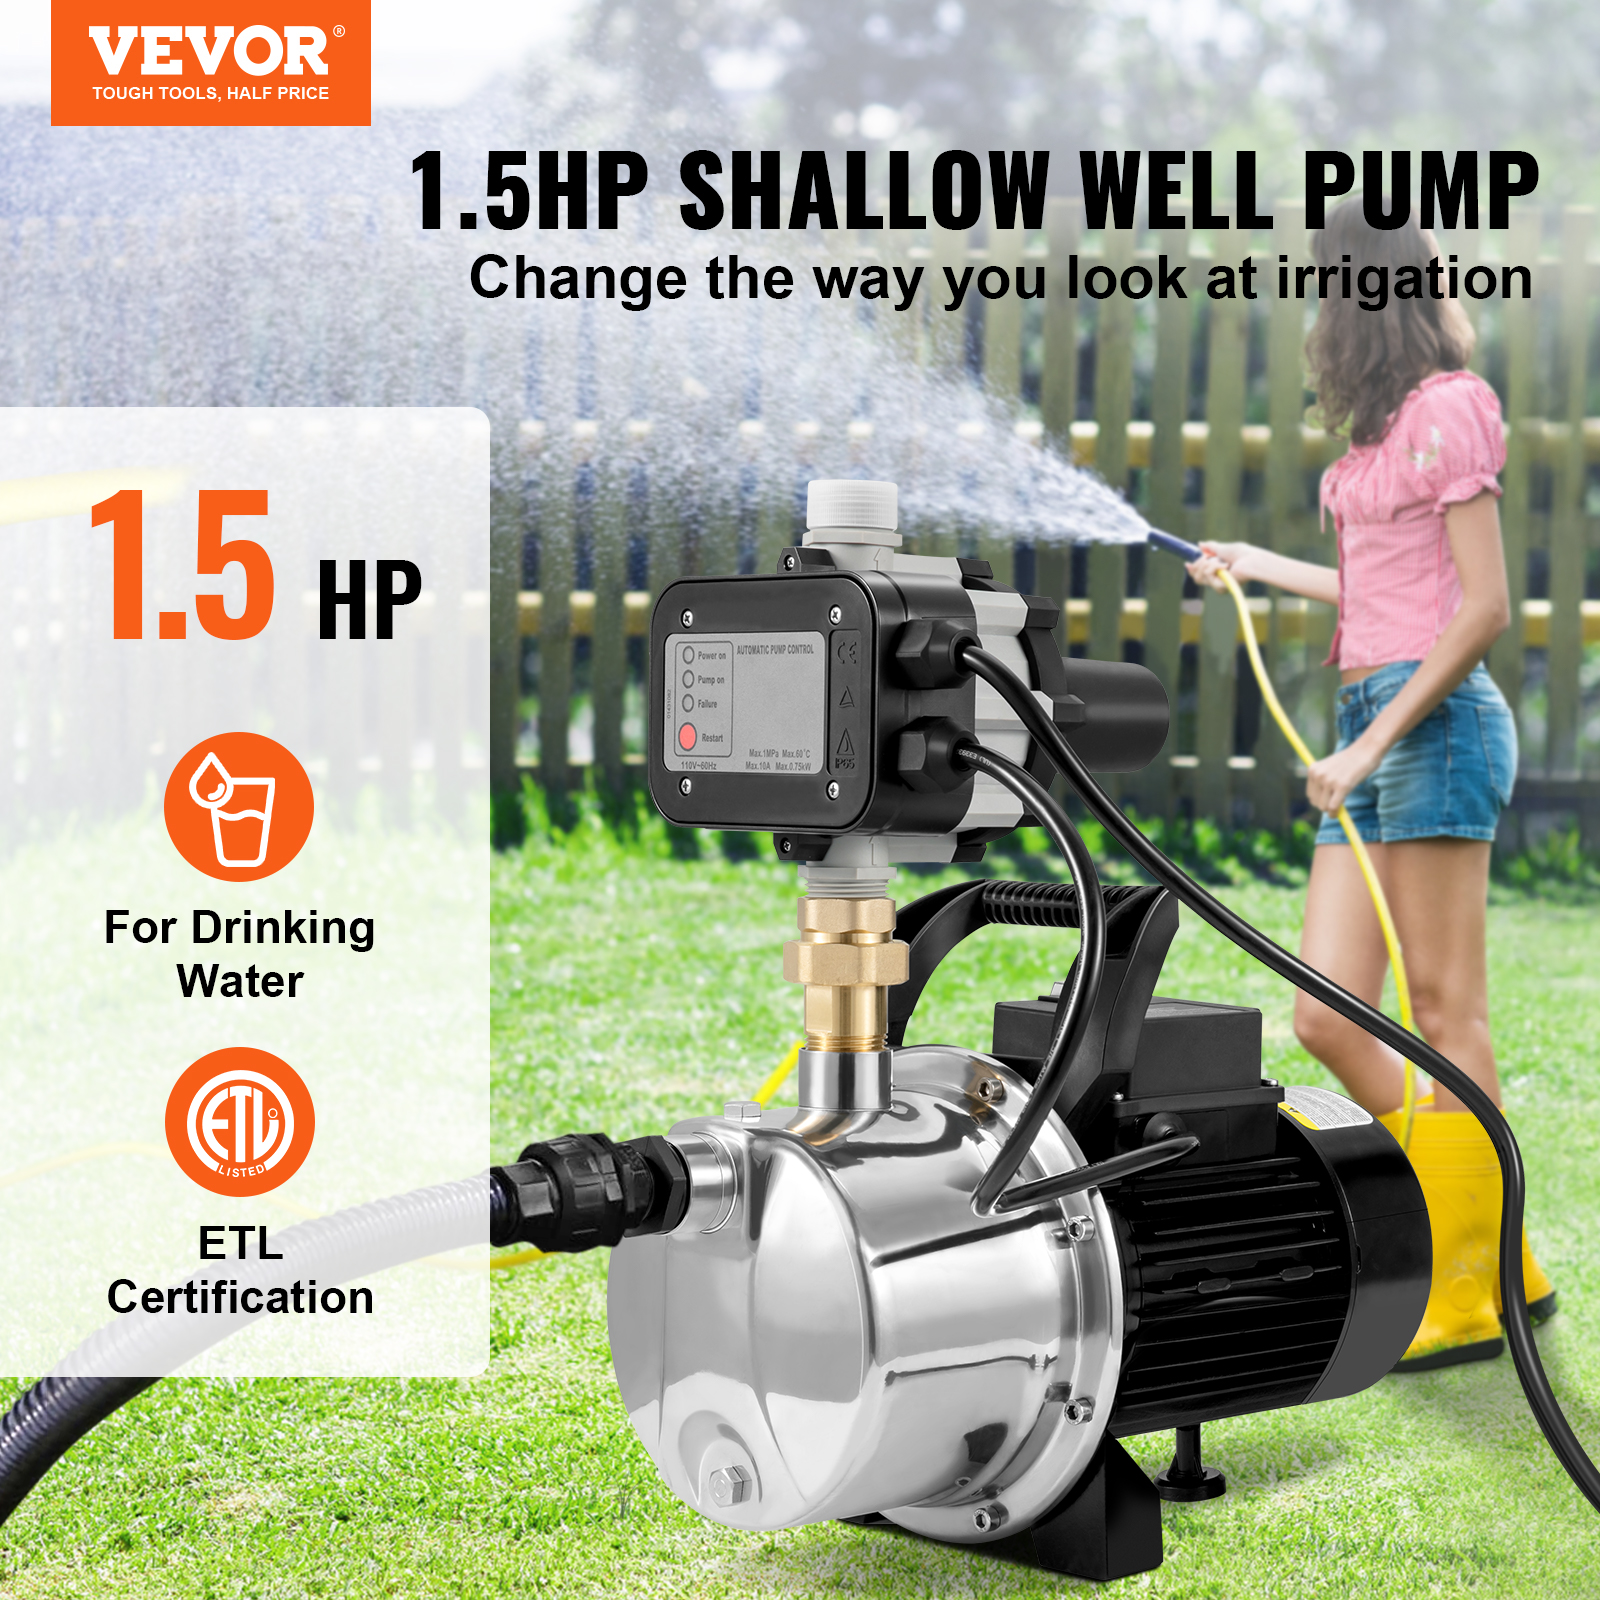 VEVORShallow Well Pump, 1.5 HP 115V, 1200 GPH 164 ft Head, Max 87 psi, Portable Stainless Steel Sprinkler Booster Jet Pumps with Automatic Controller for Garden Lawn Irrigation system, Water Transfer - image 2 of 9